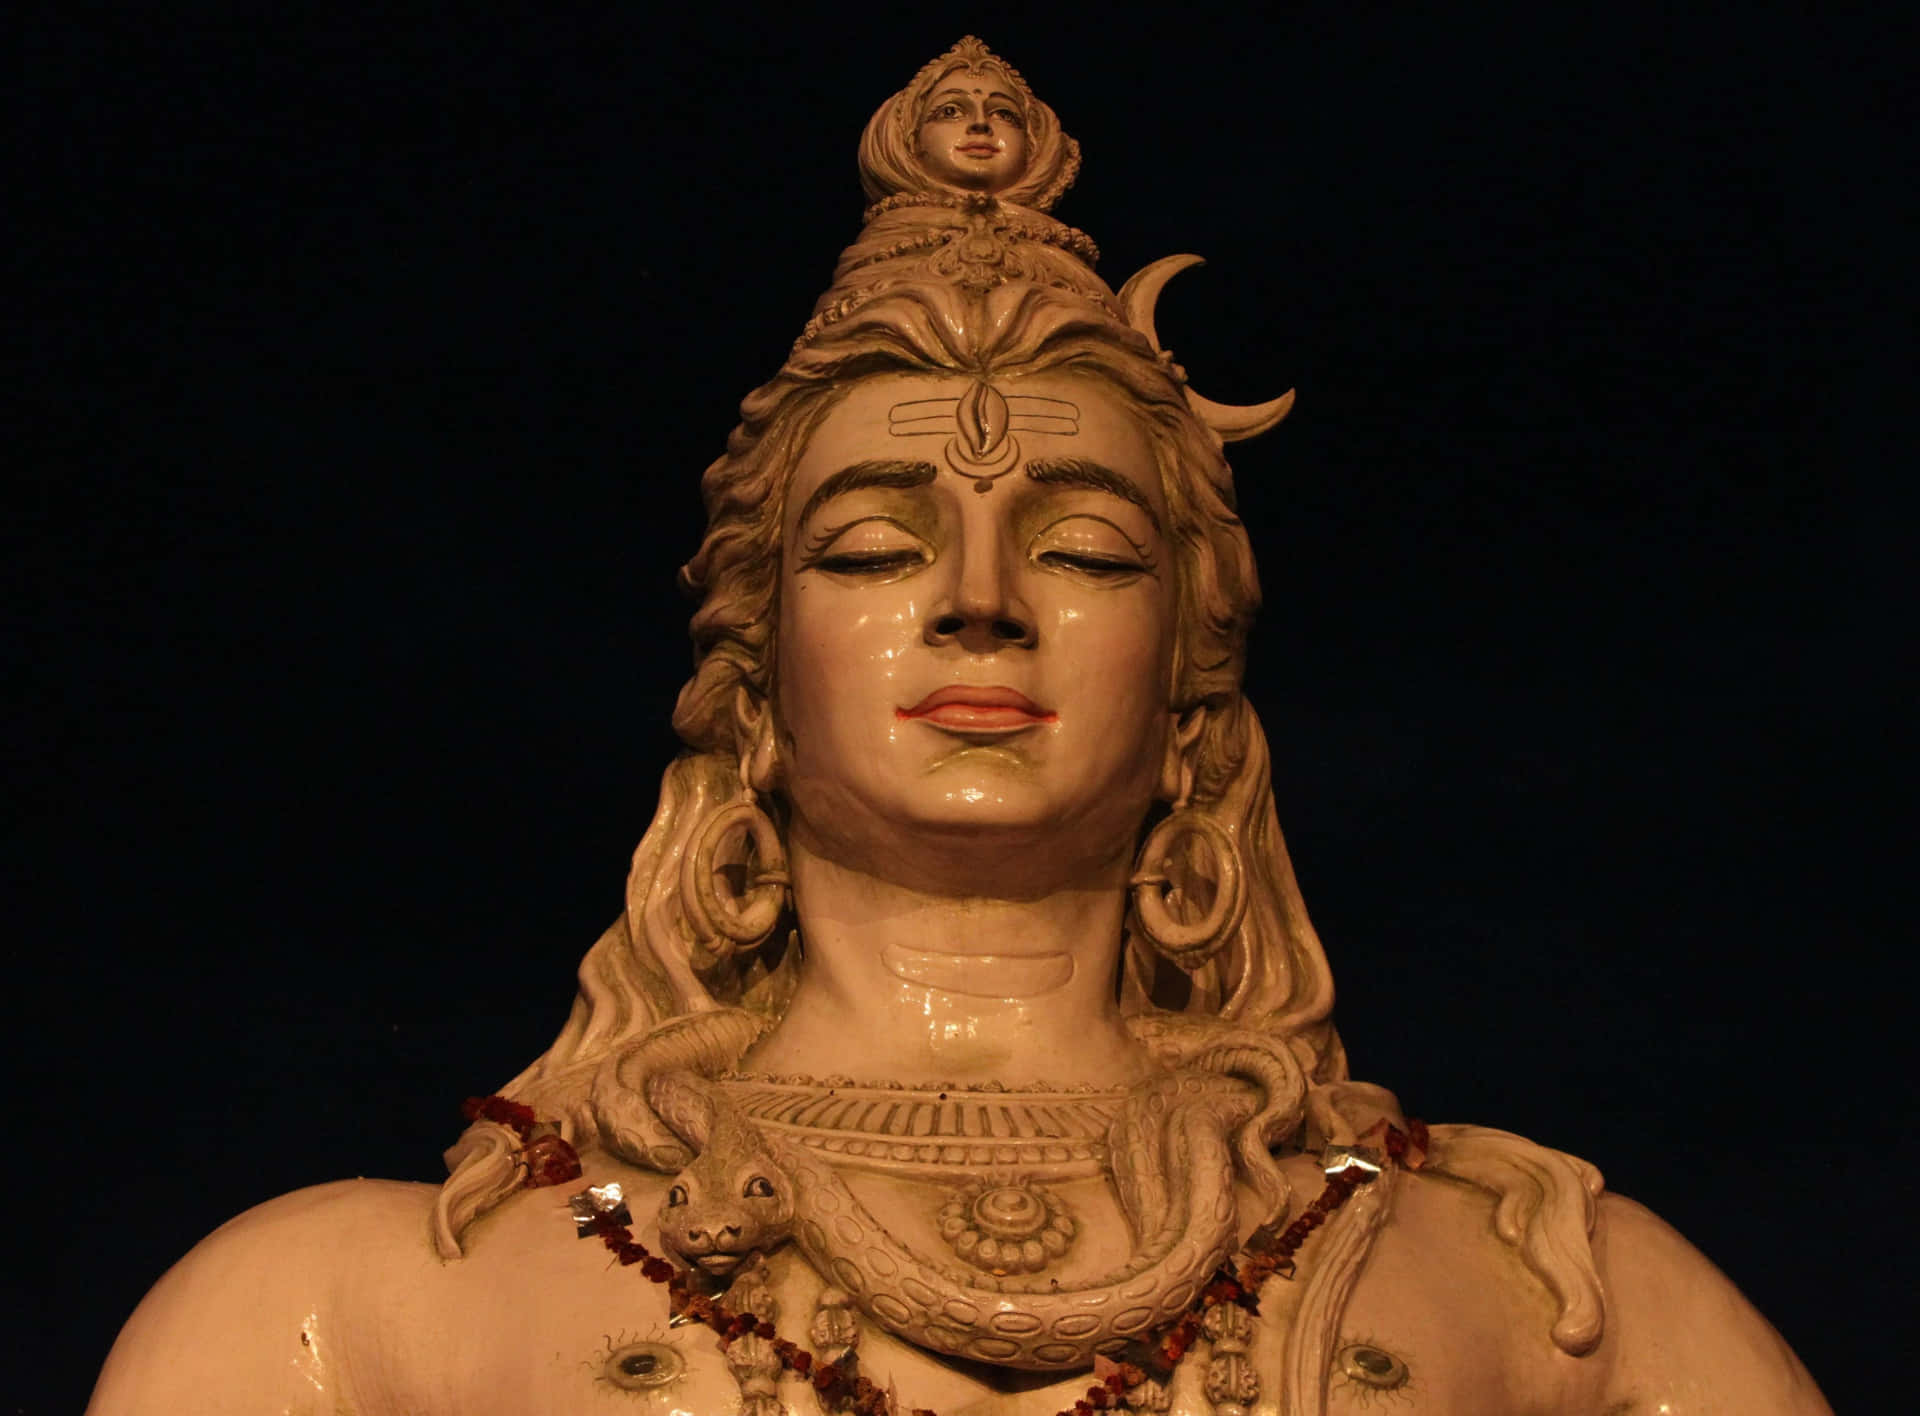 A Statue Of Lord Shiva With Long Hair